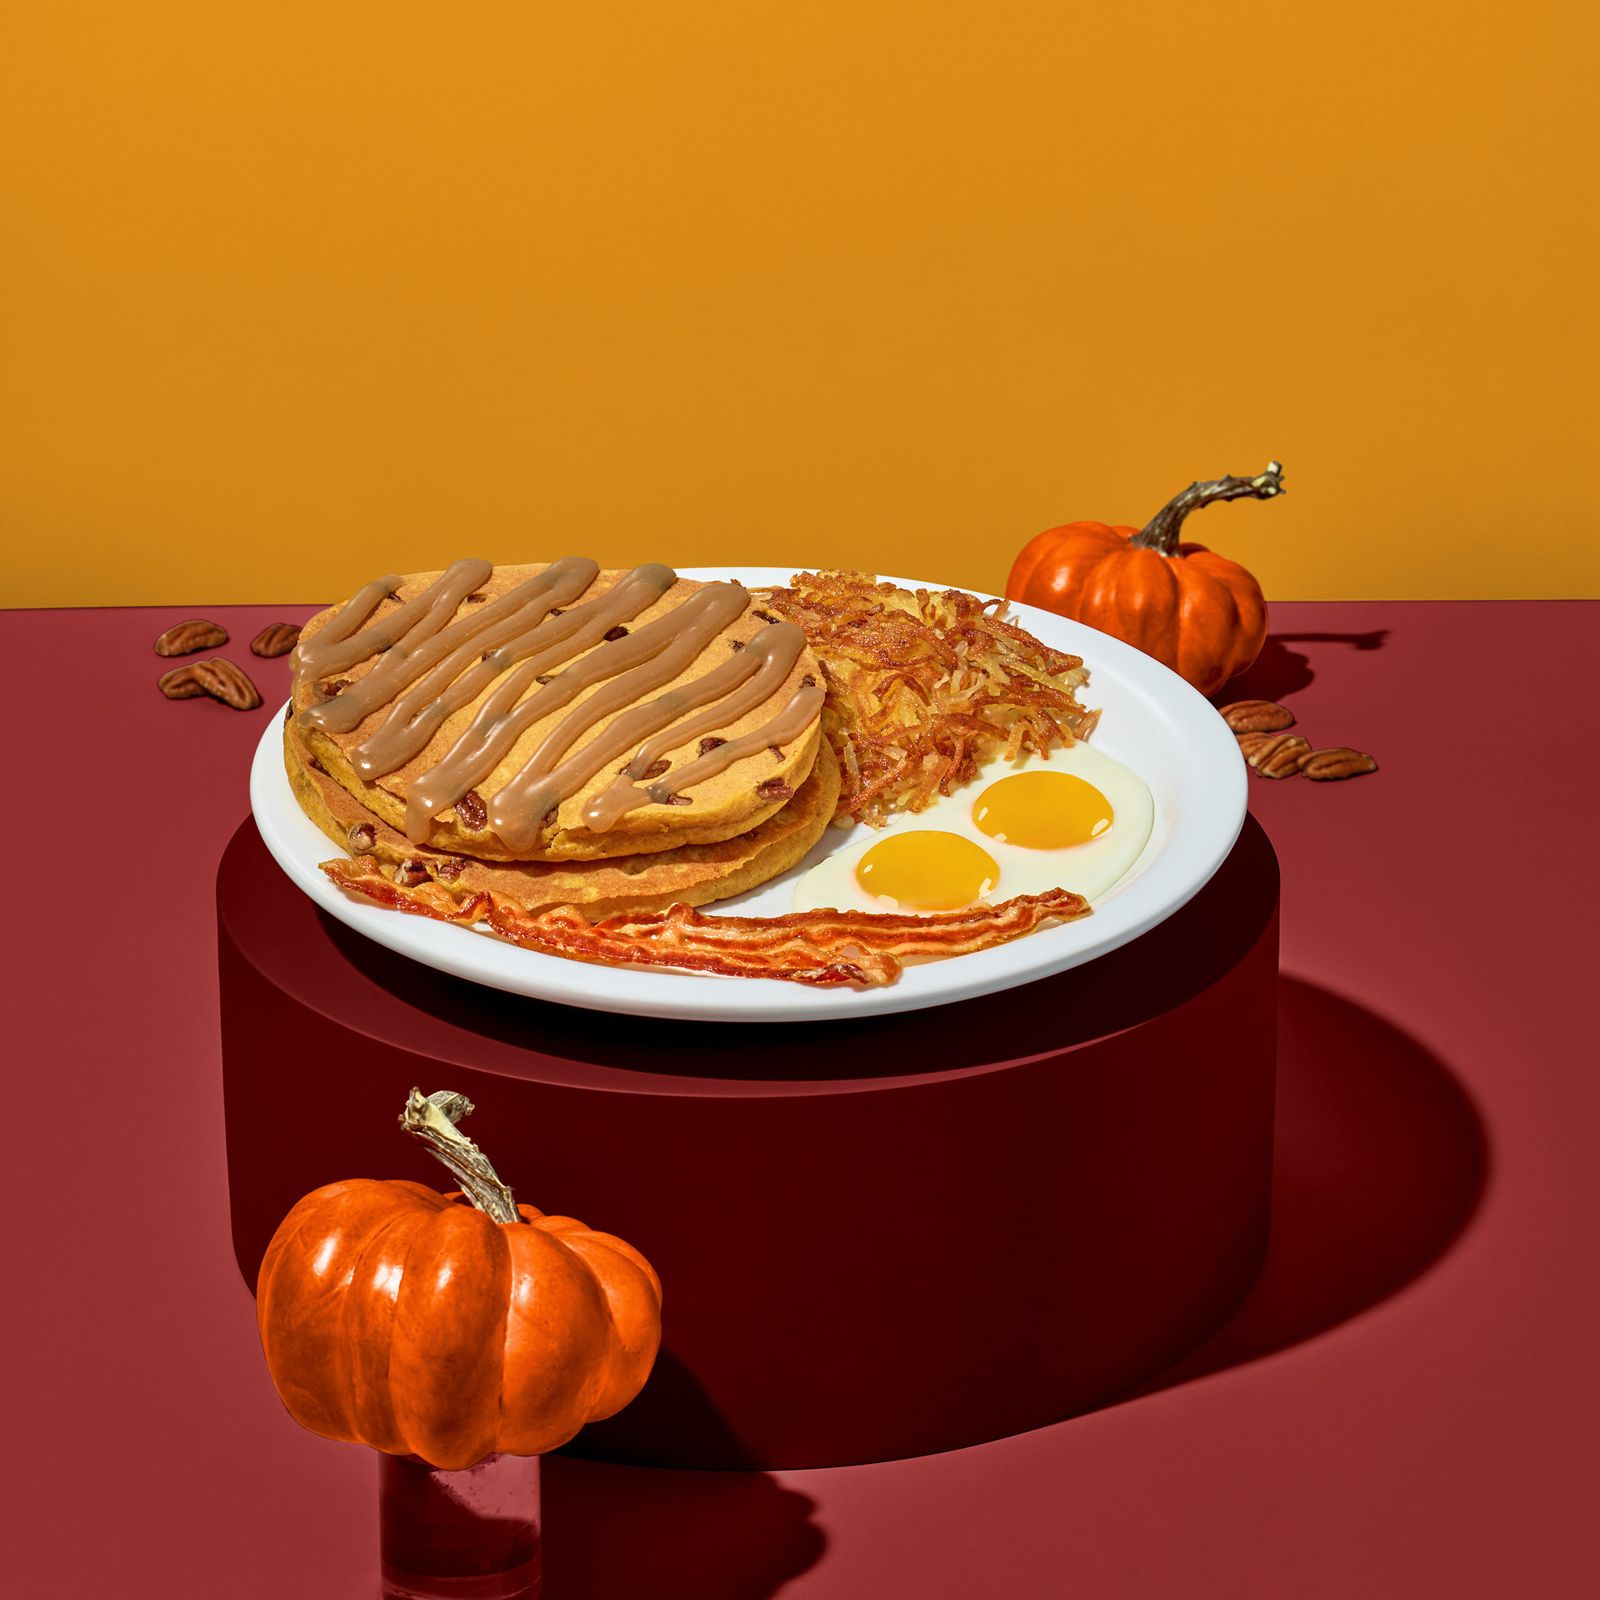 Denny's is Serving Up Value, Comfort and Convenience with the Return of Super Slam and New Pumpkin Pecan Pancakes